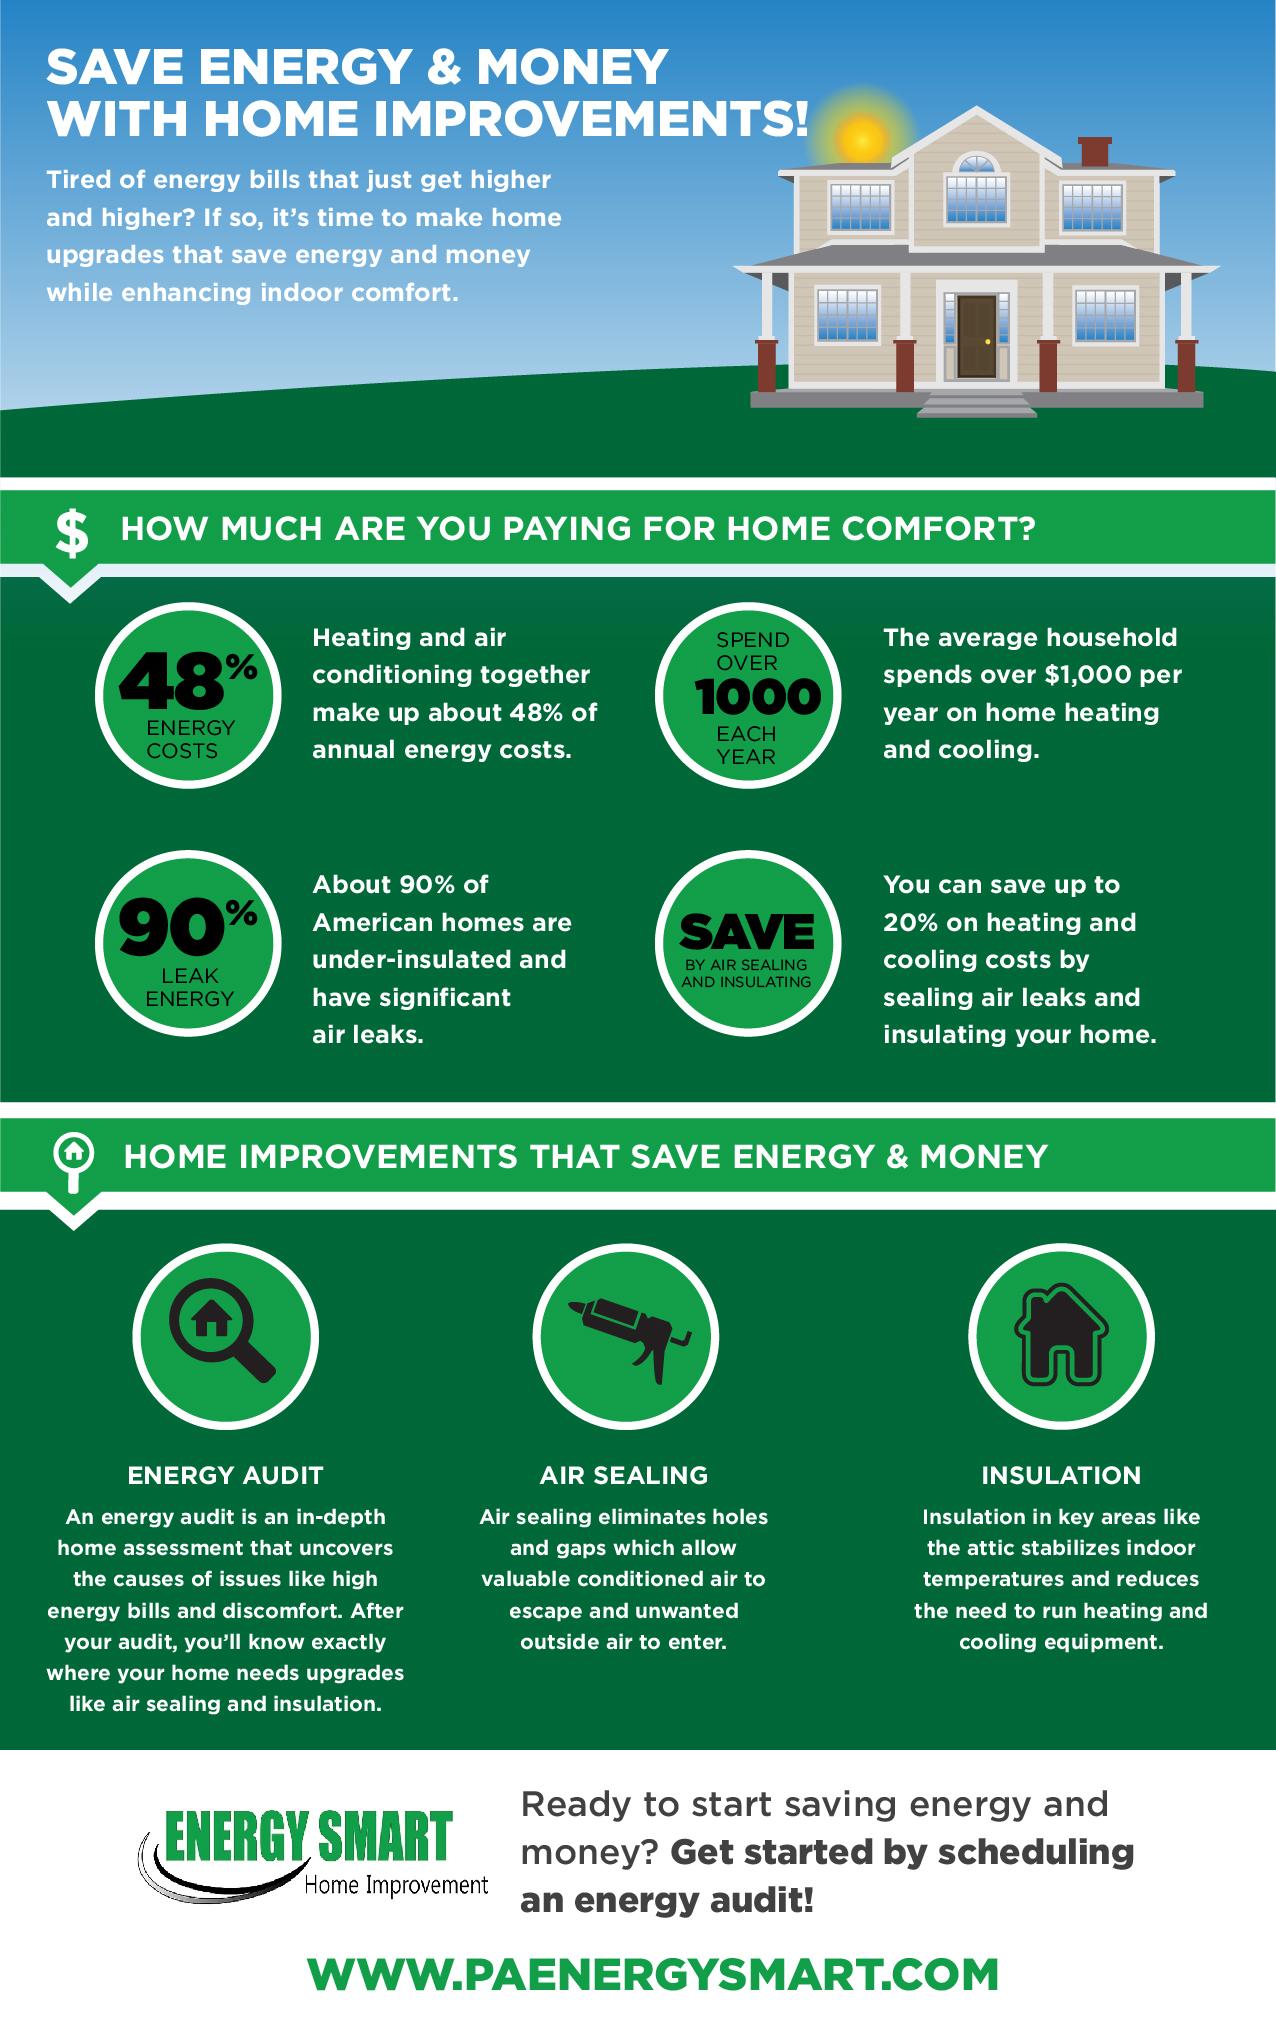 Save Energy & Money with Home Improvements infographic energy smart home improvement